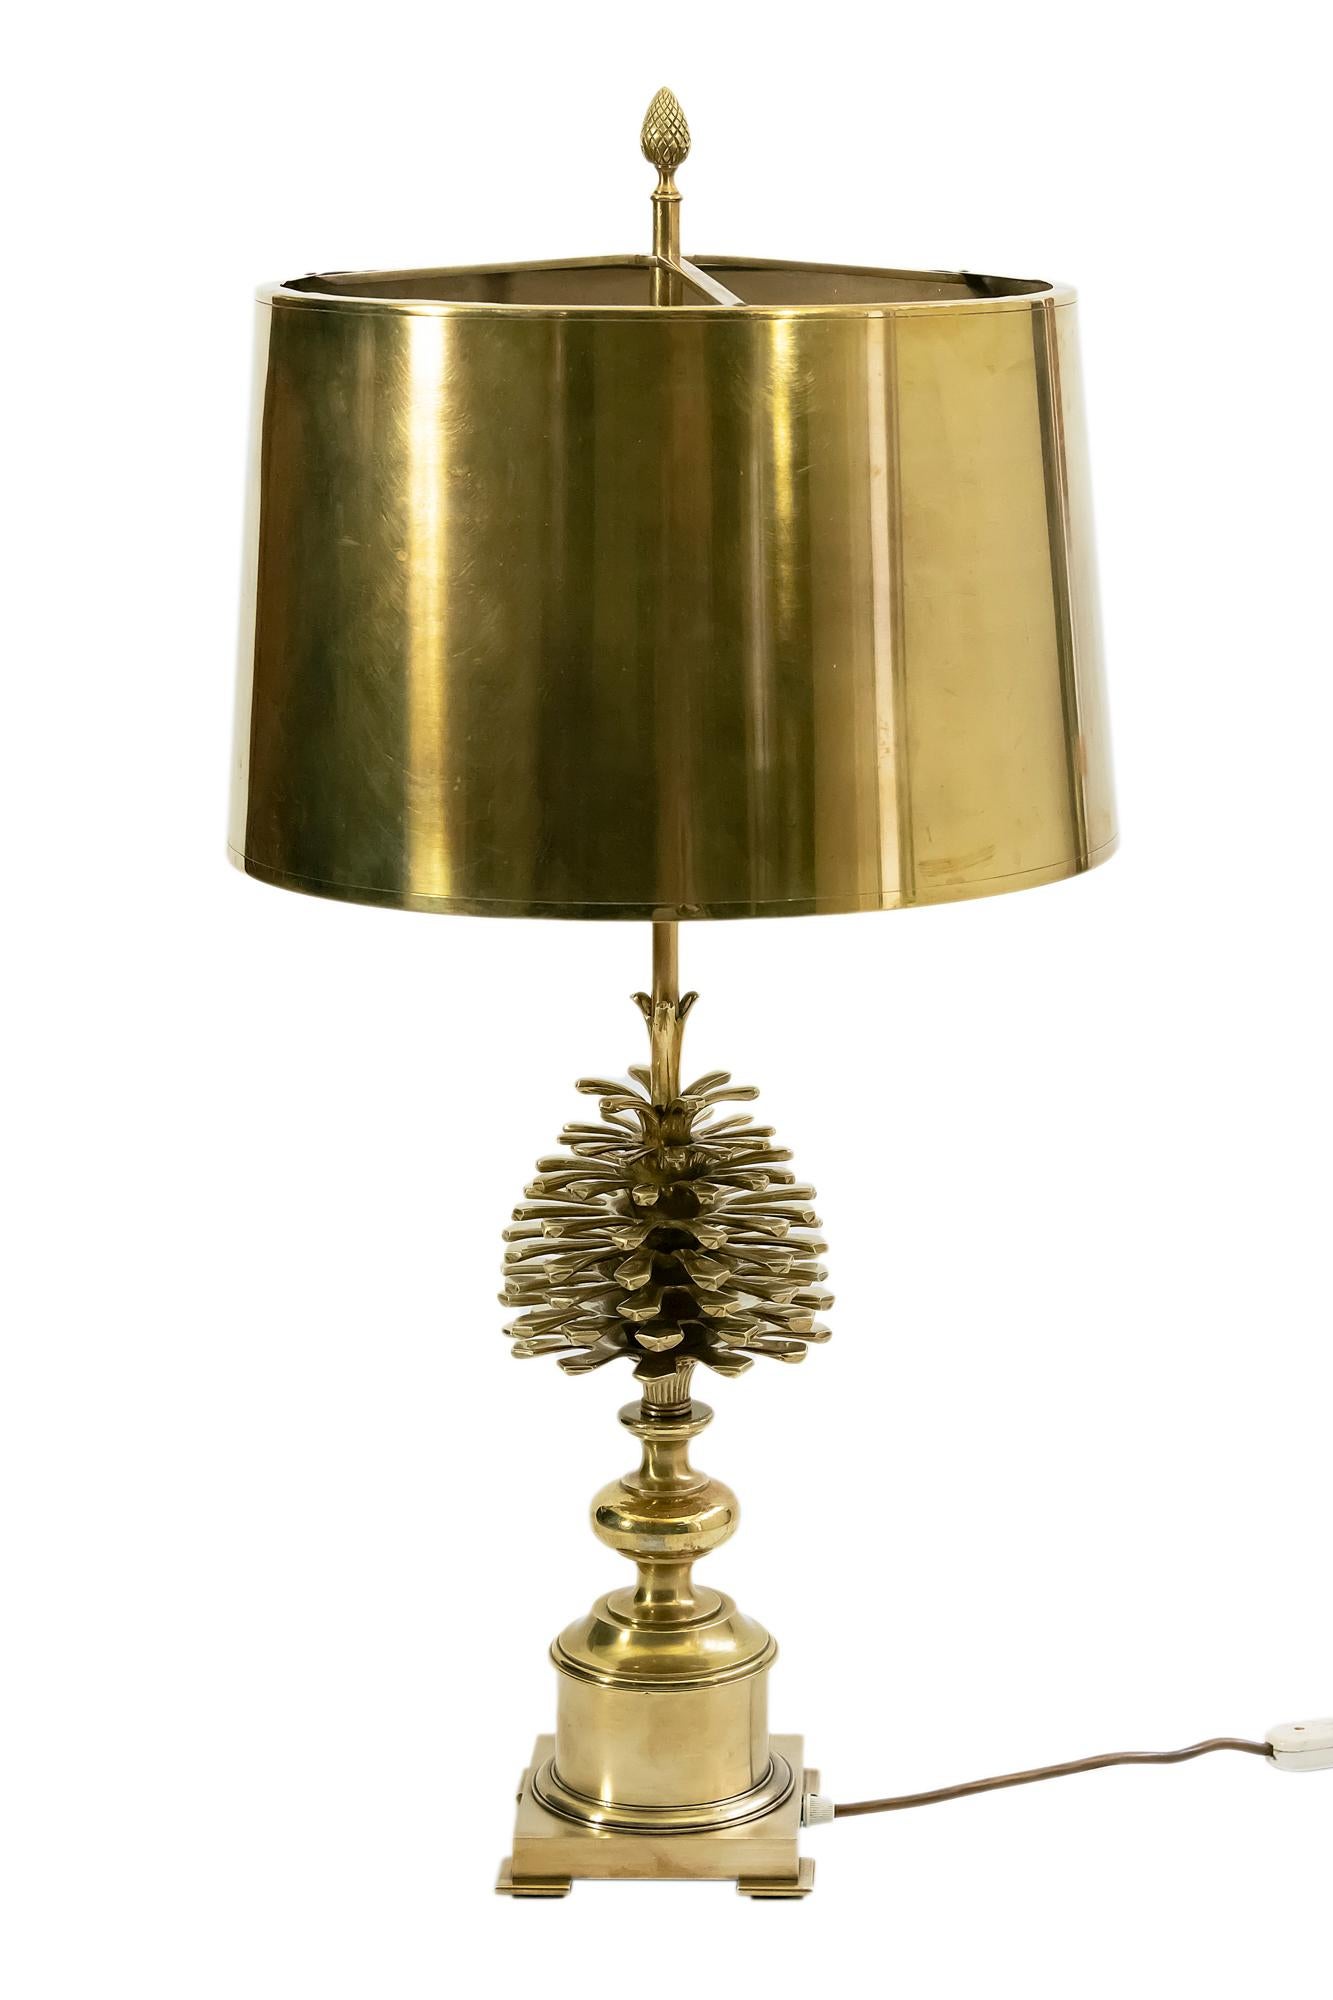 Vintage French bronze table lamp with pine cone element decor and bonze shade by Maison Charles.
Lamp includes E27 bulb.
 